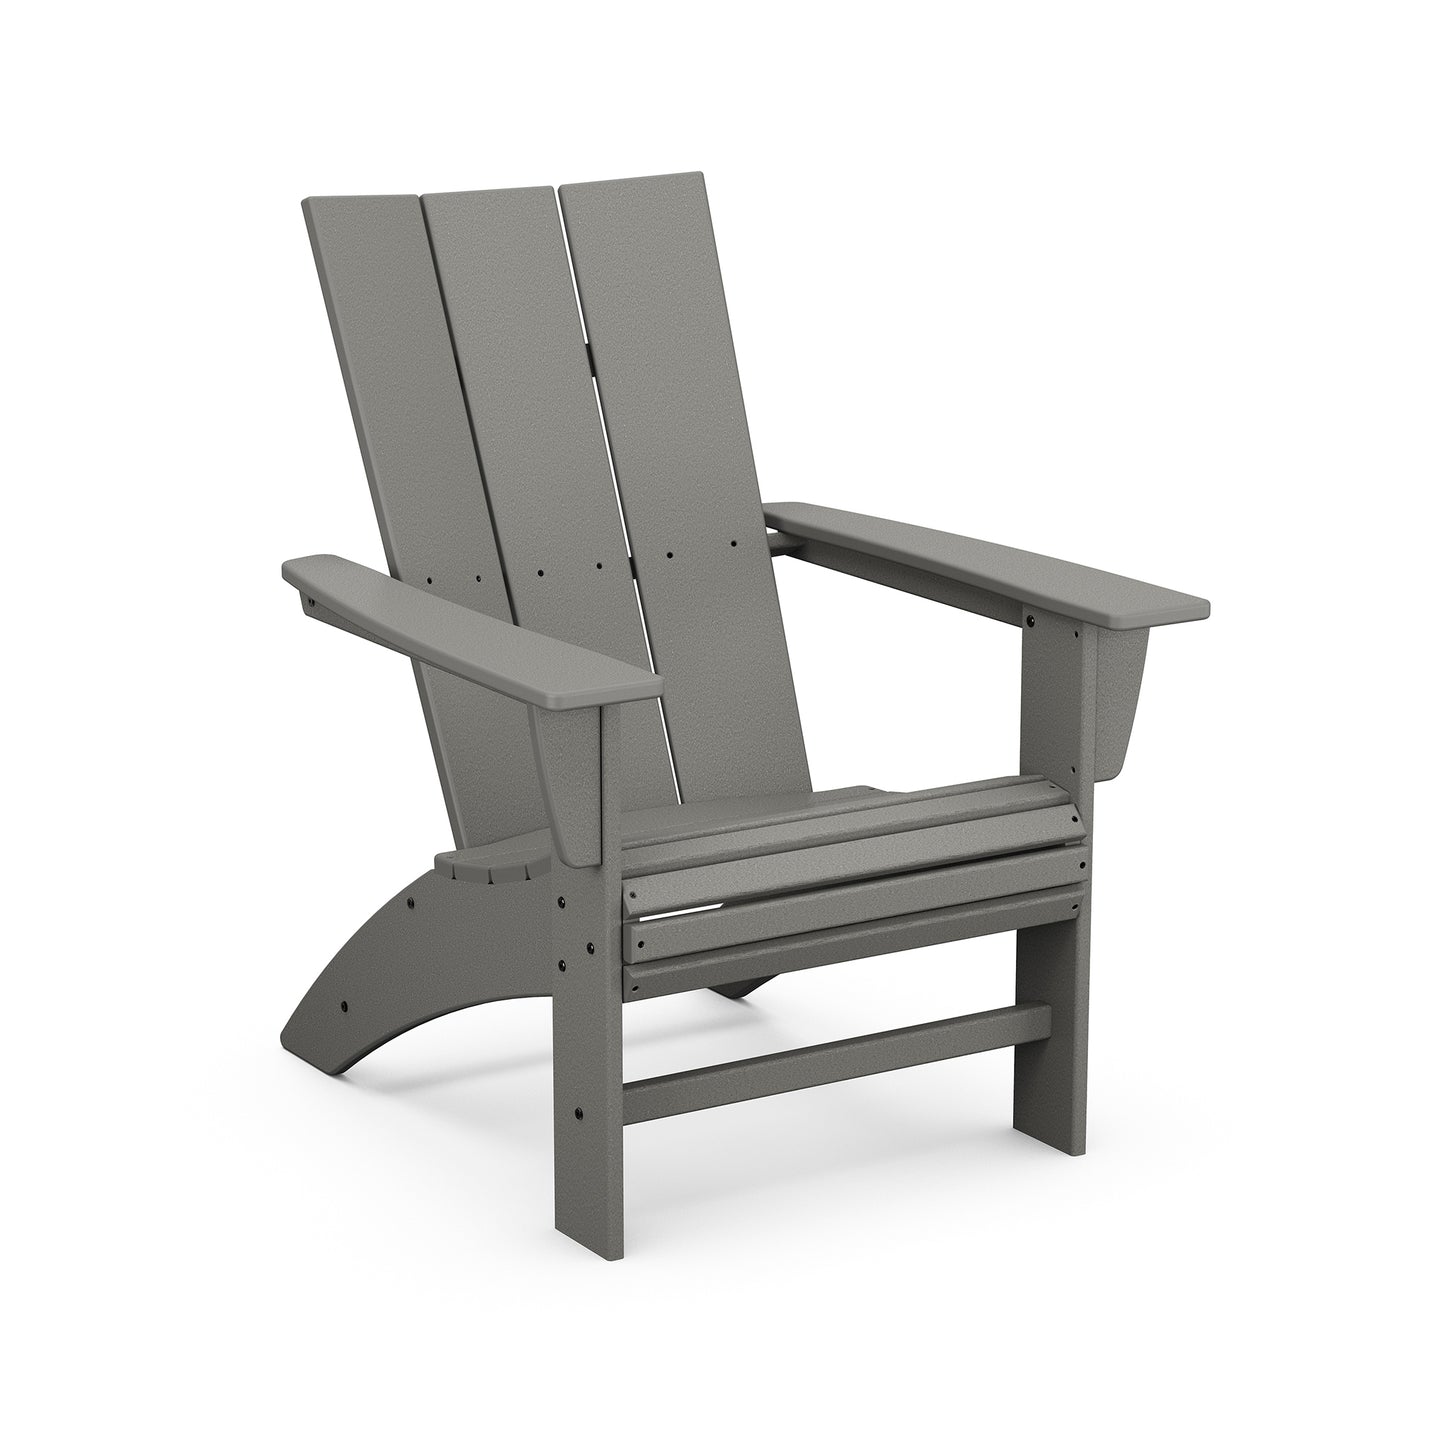 A modern grey POLYWOOD Modern Curveback Adirondack chair made of POLYWOOD lumber, featuring broad flat arms and a slatted back, isolated on a white background.